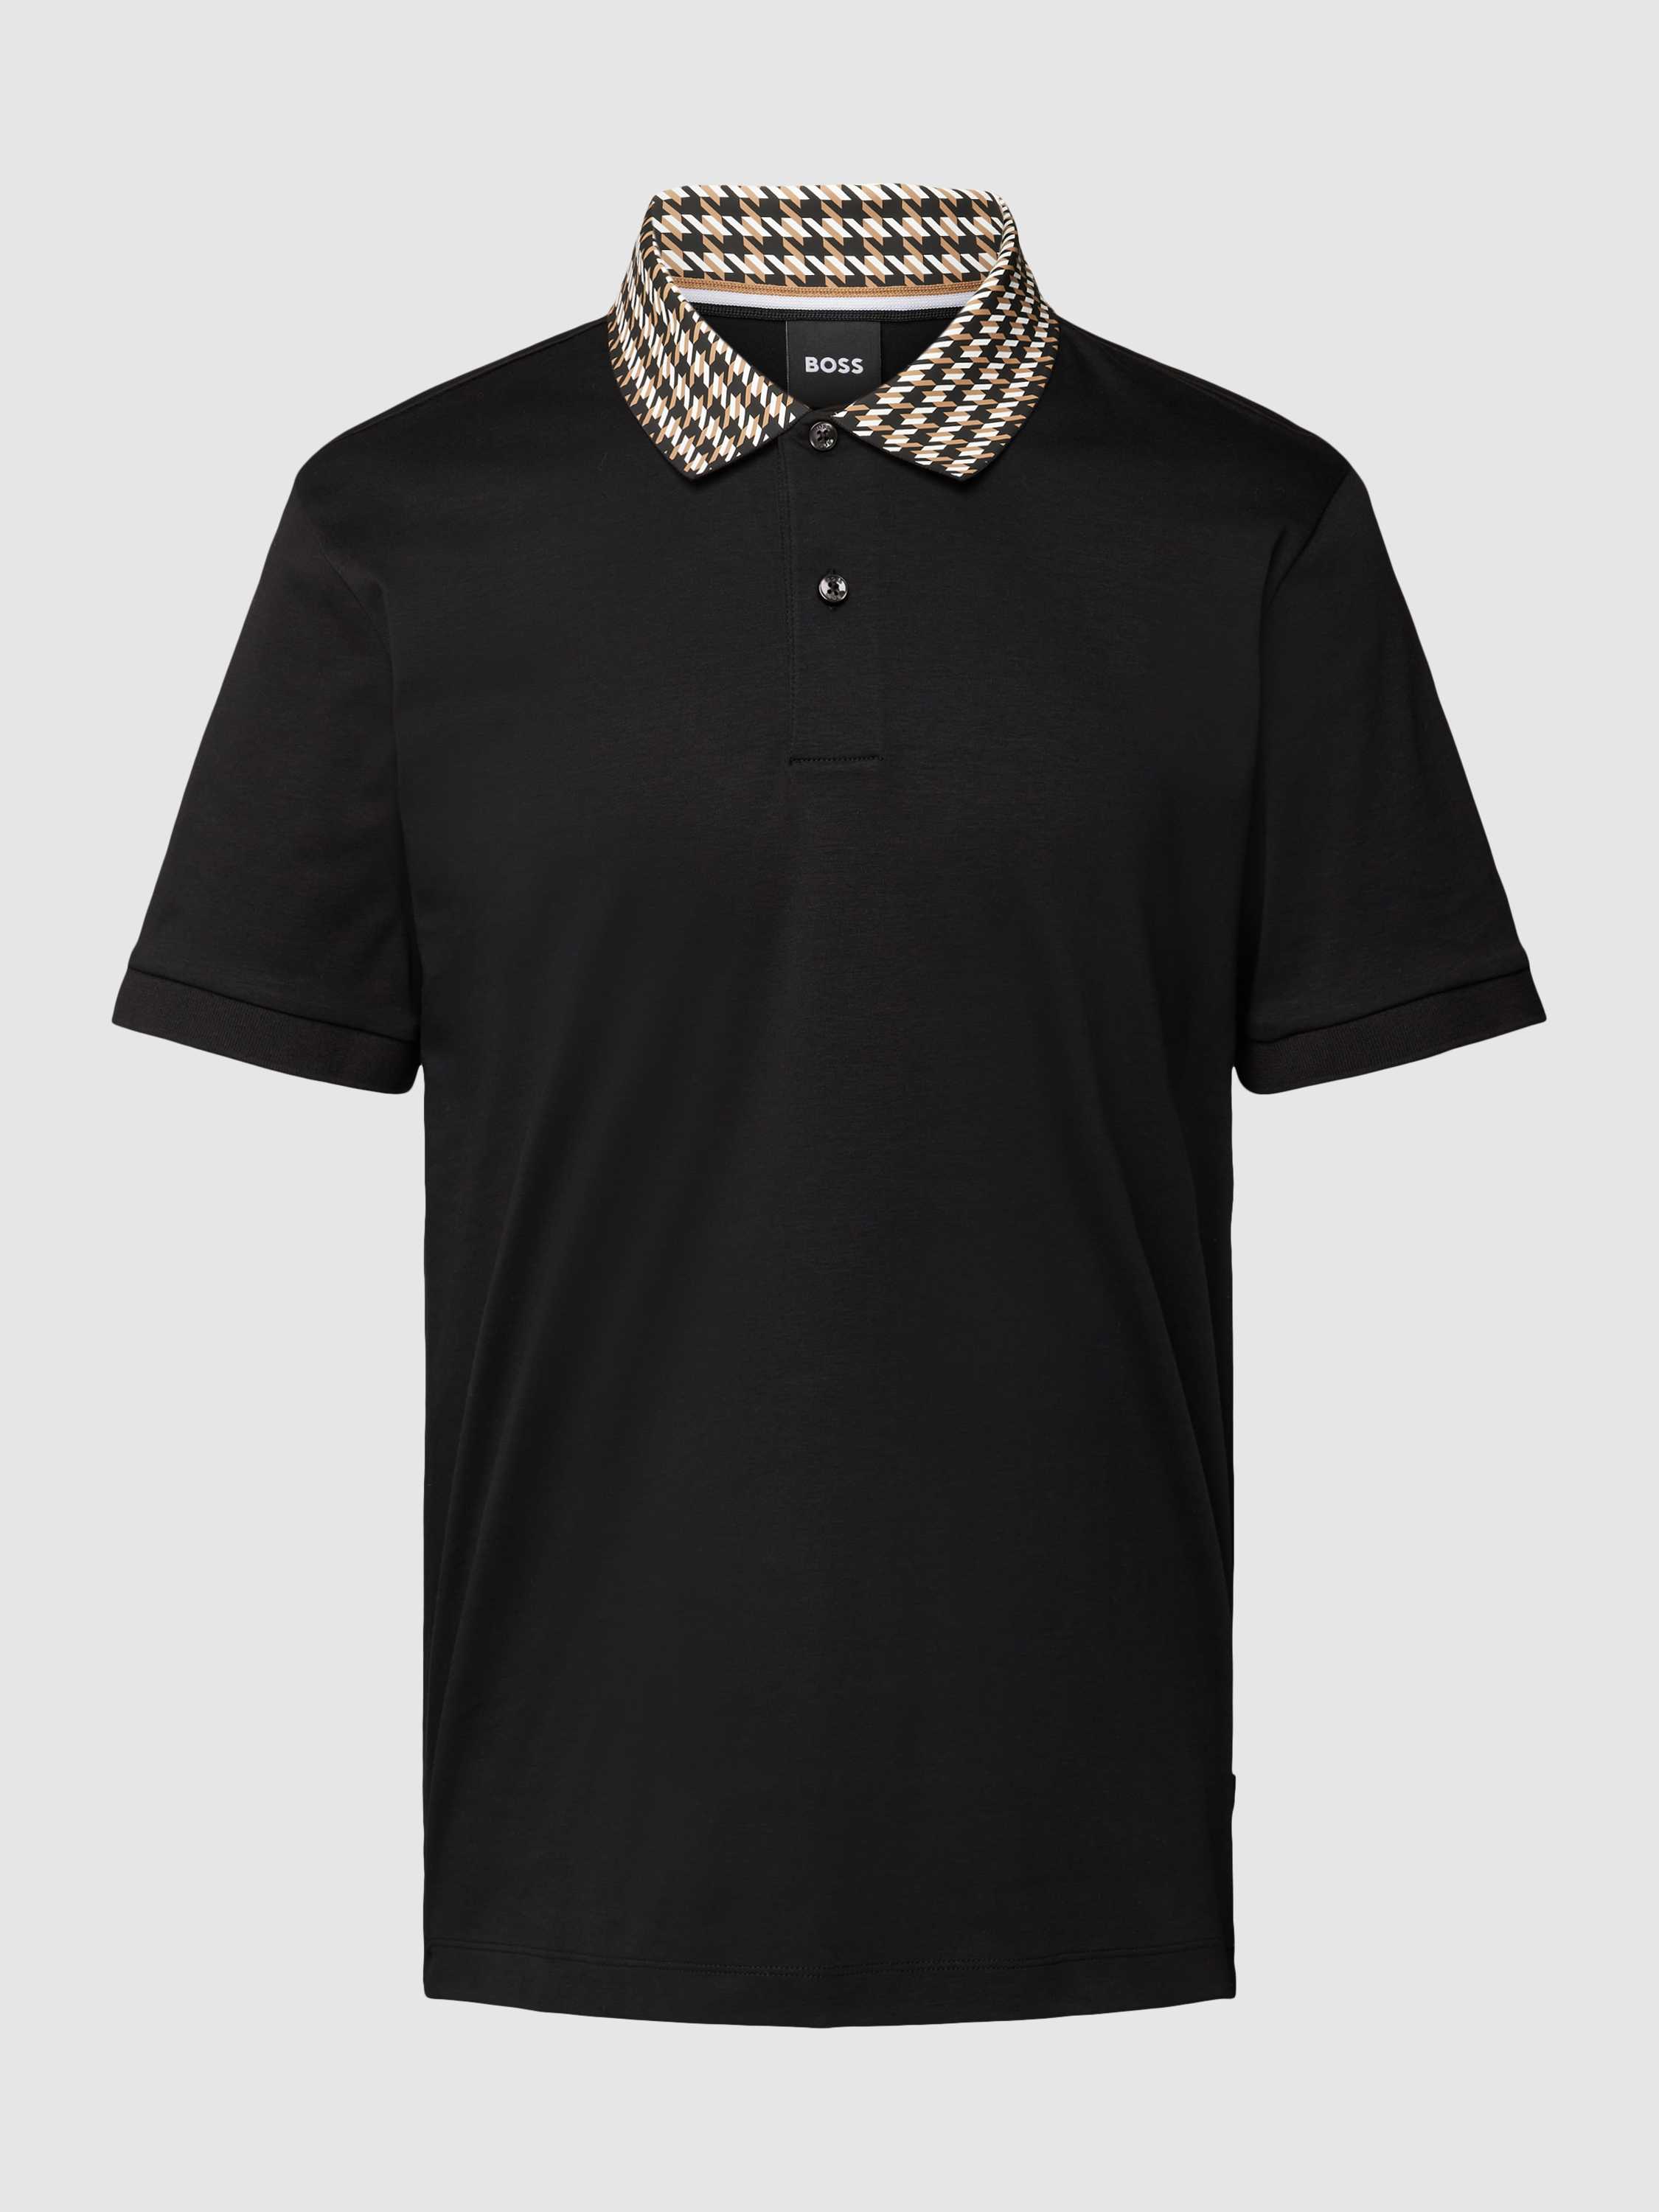 Poloshirt mit Label-Details Modell 'Parlay'